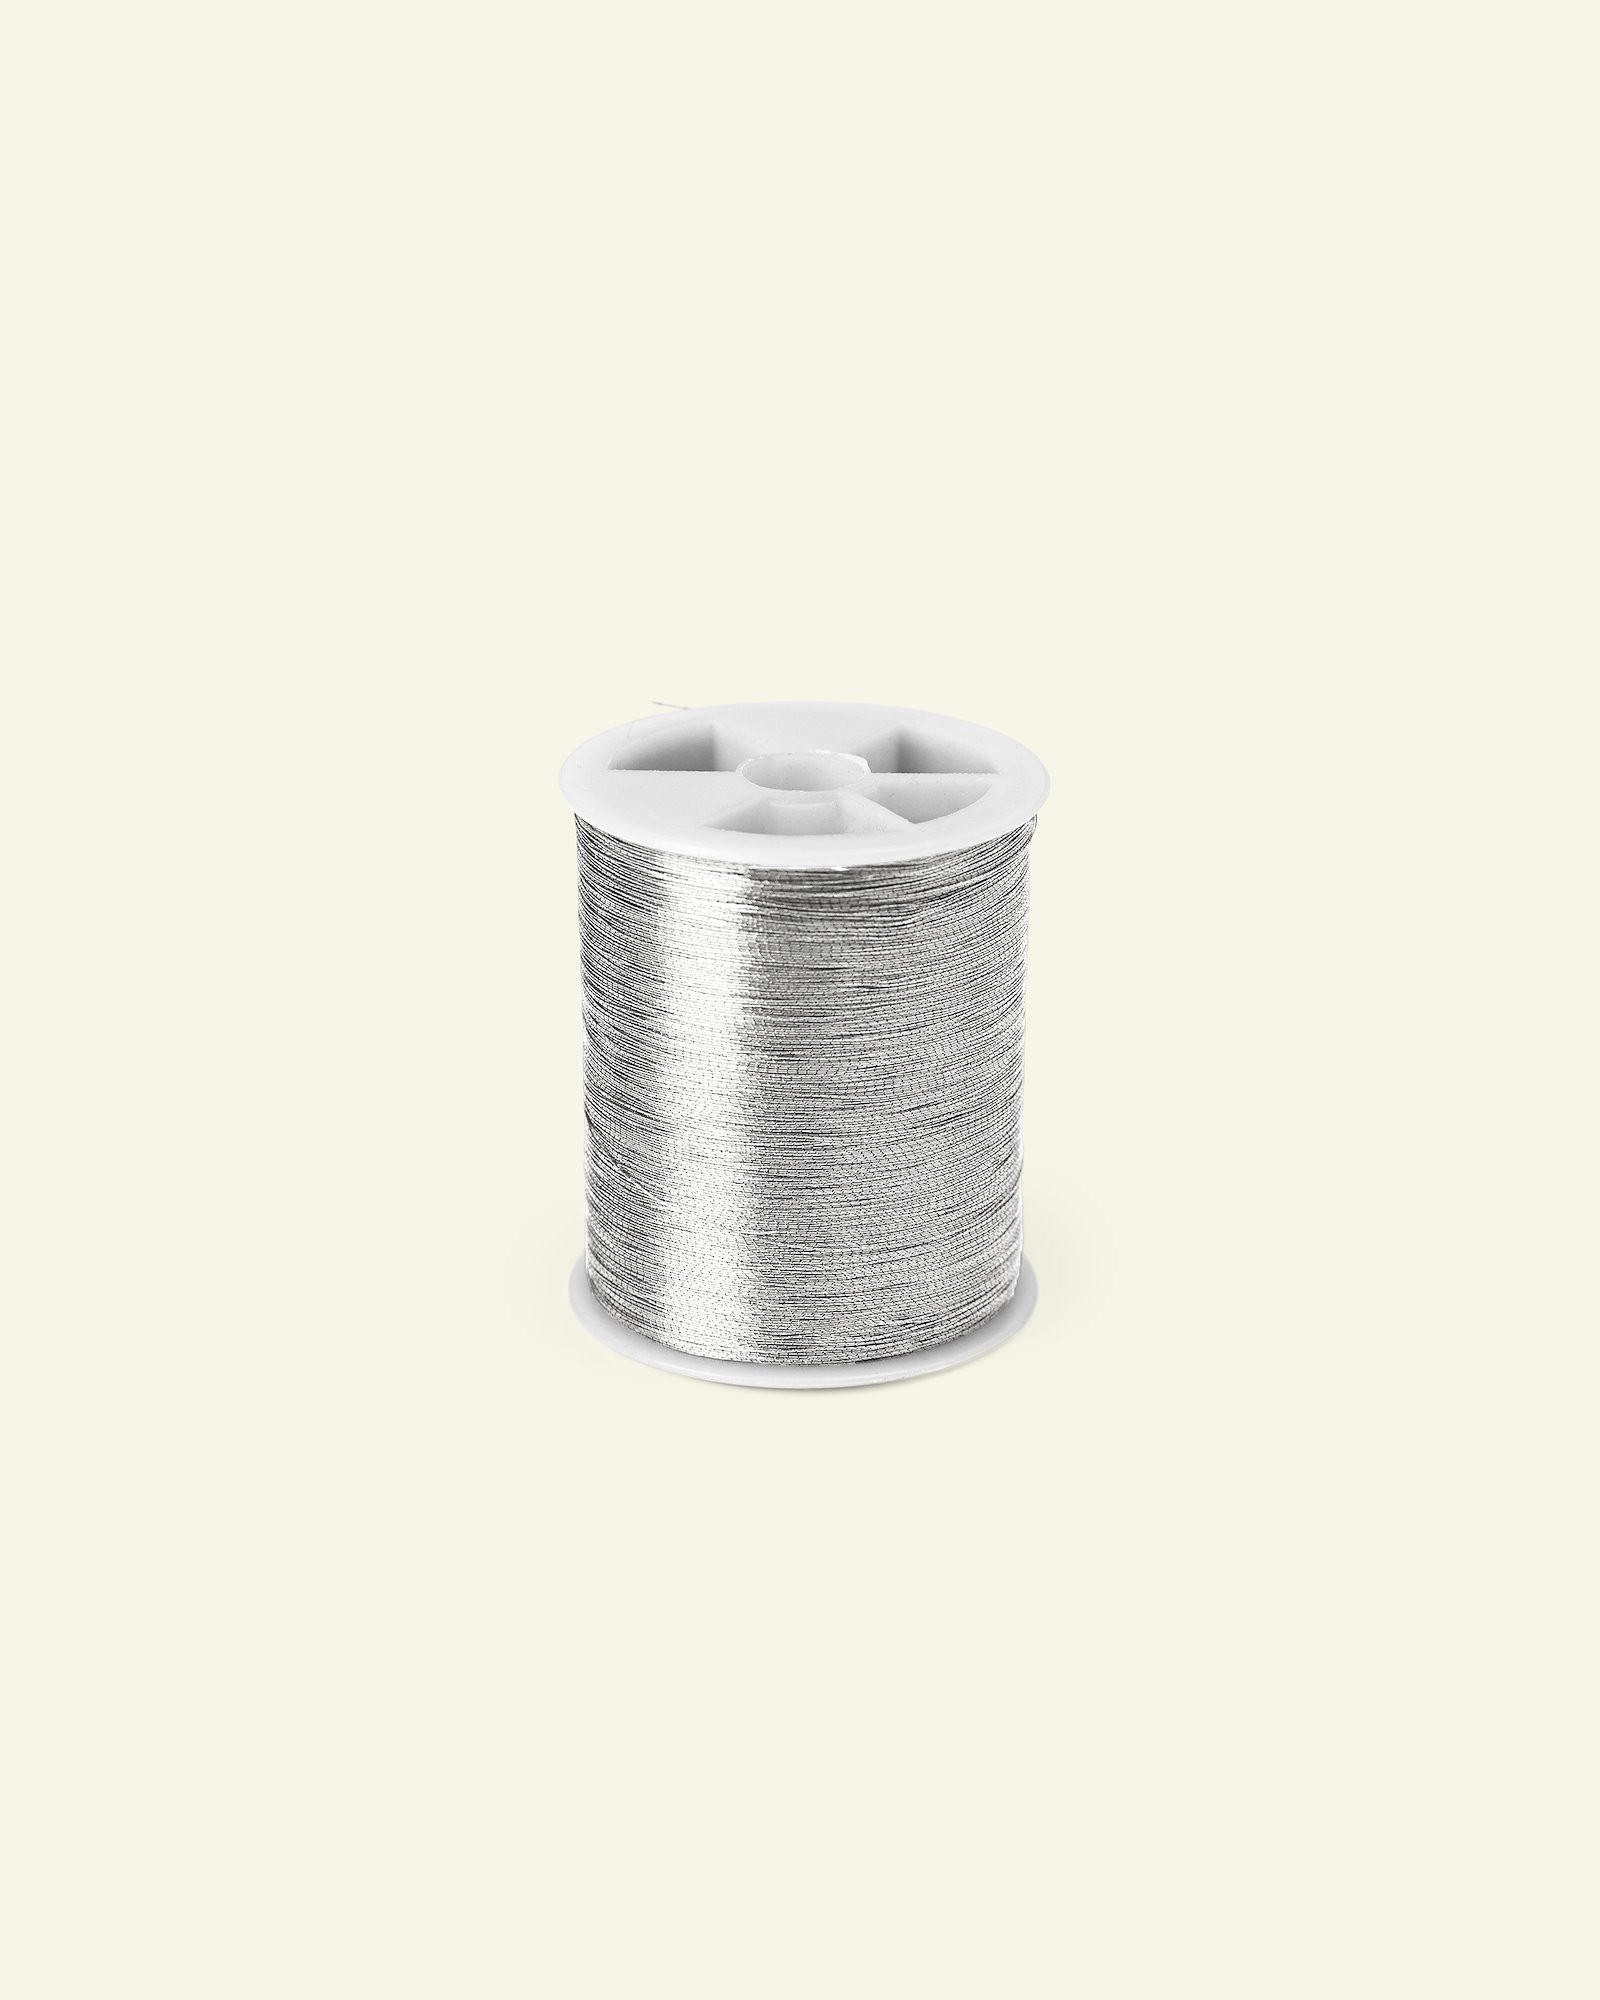 Sewing thread metallic silver color 200m 59101_pack